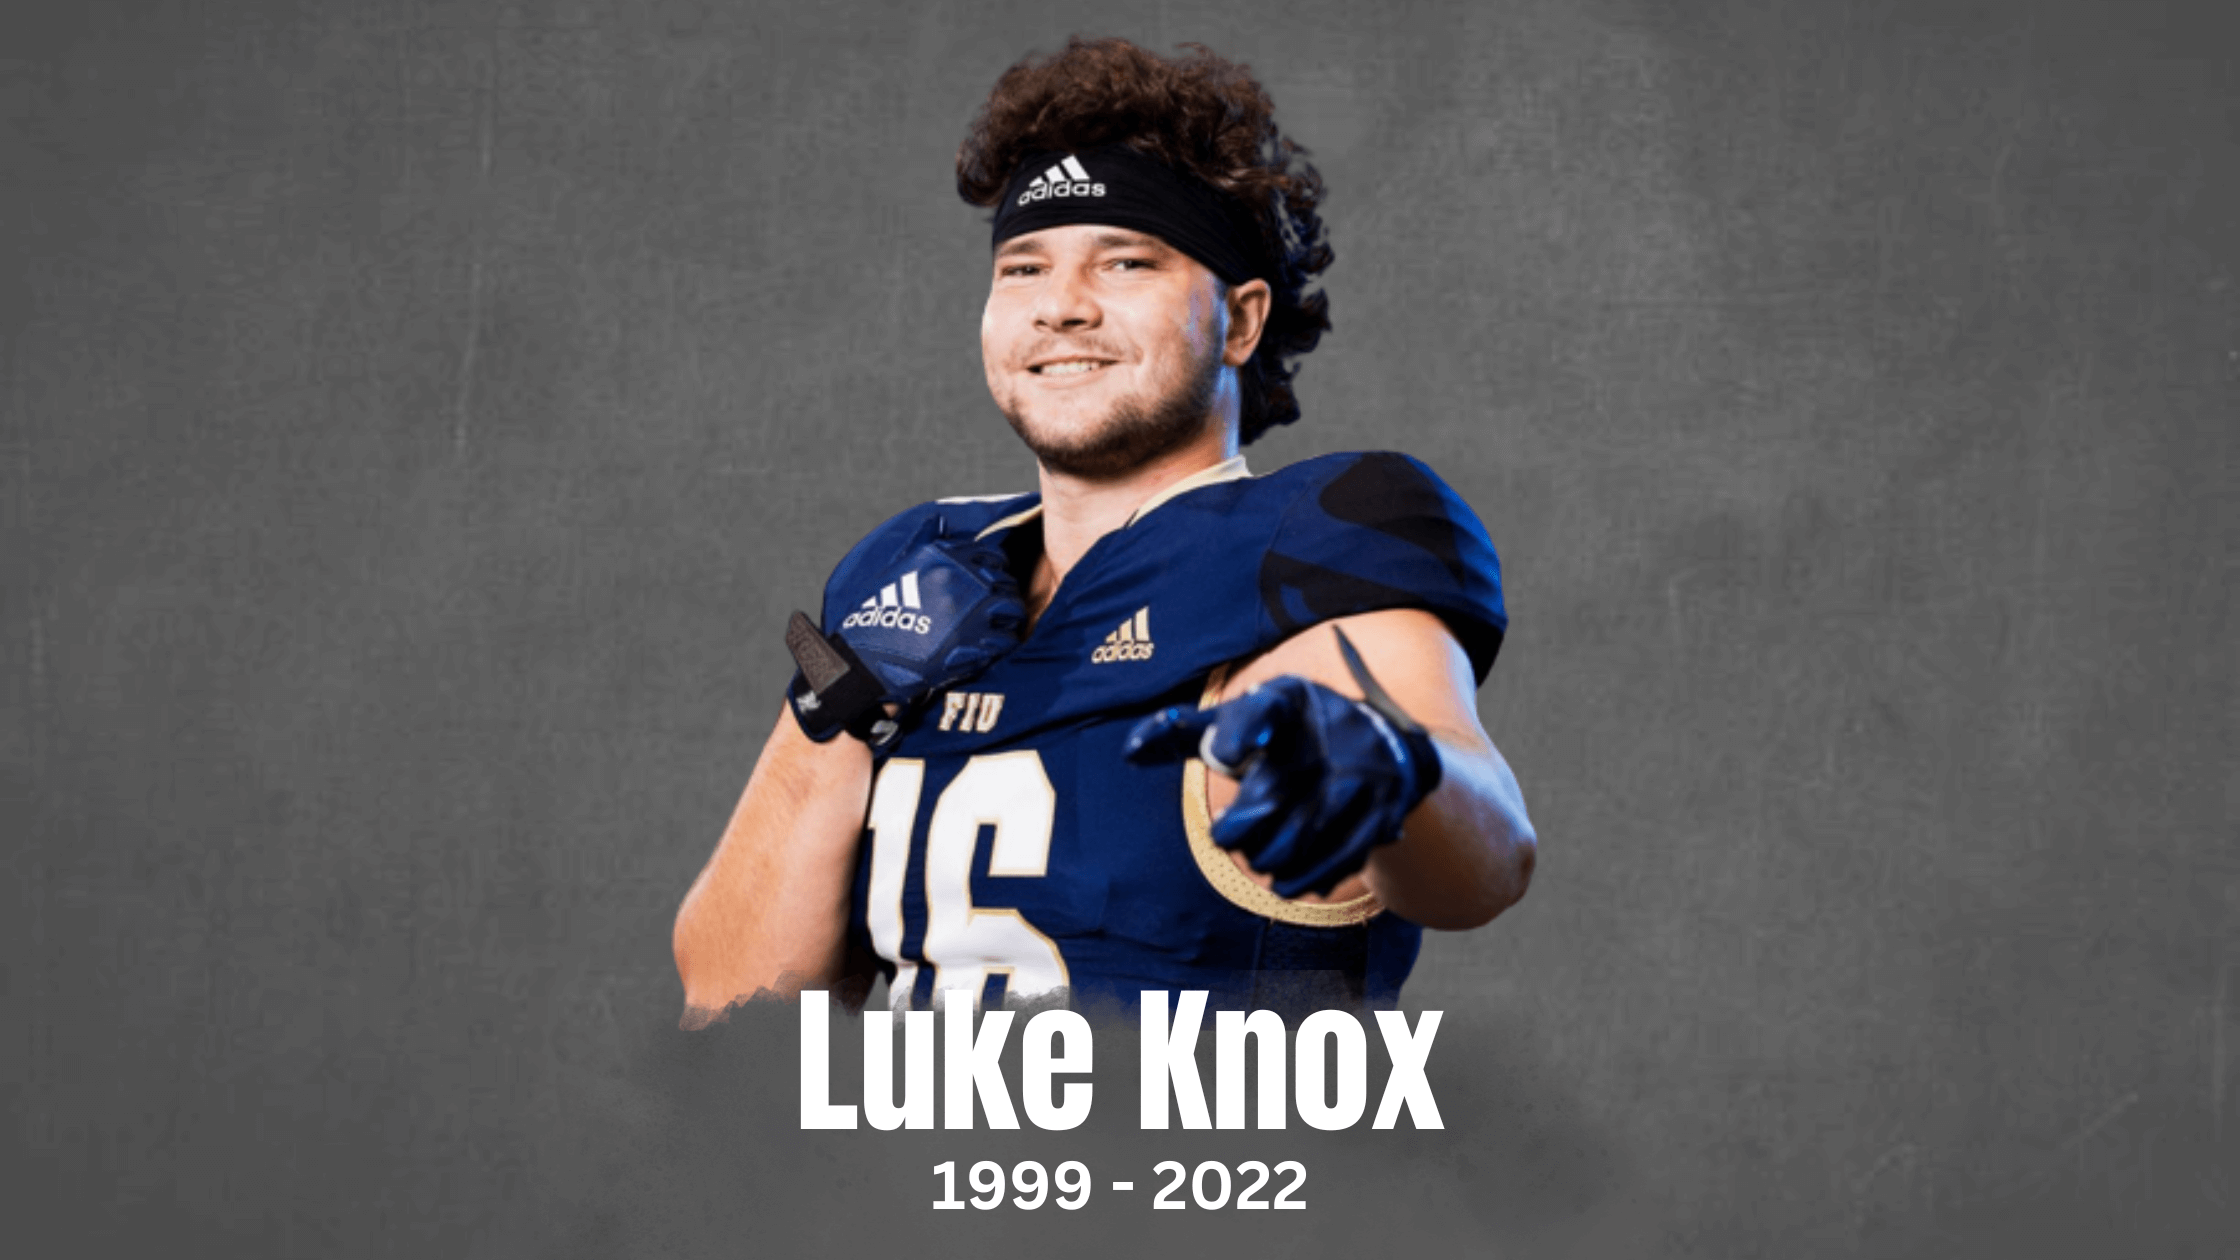 What Happened To The Panther Luke Knox